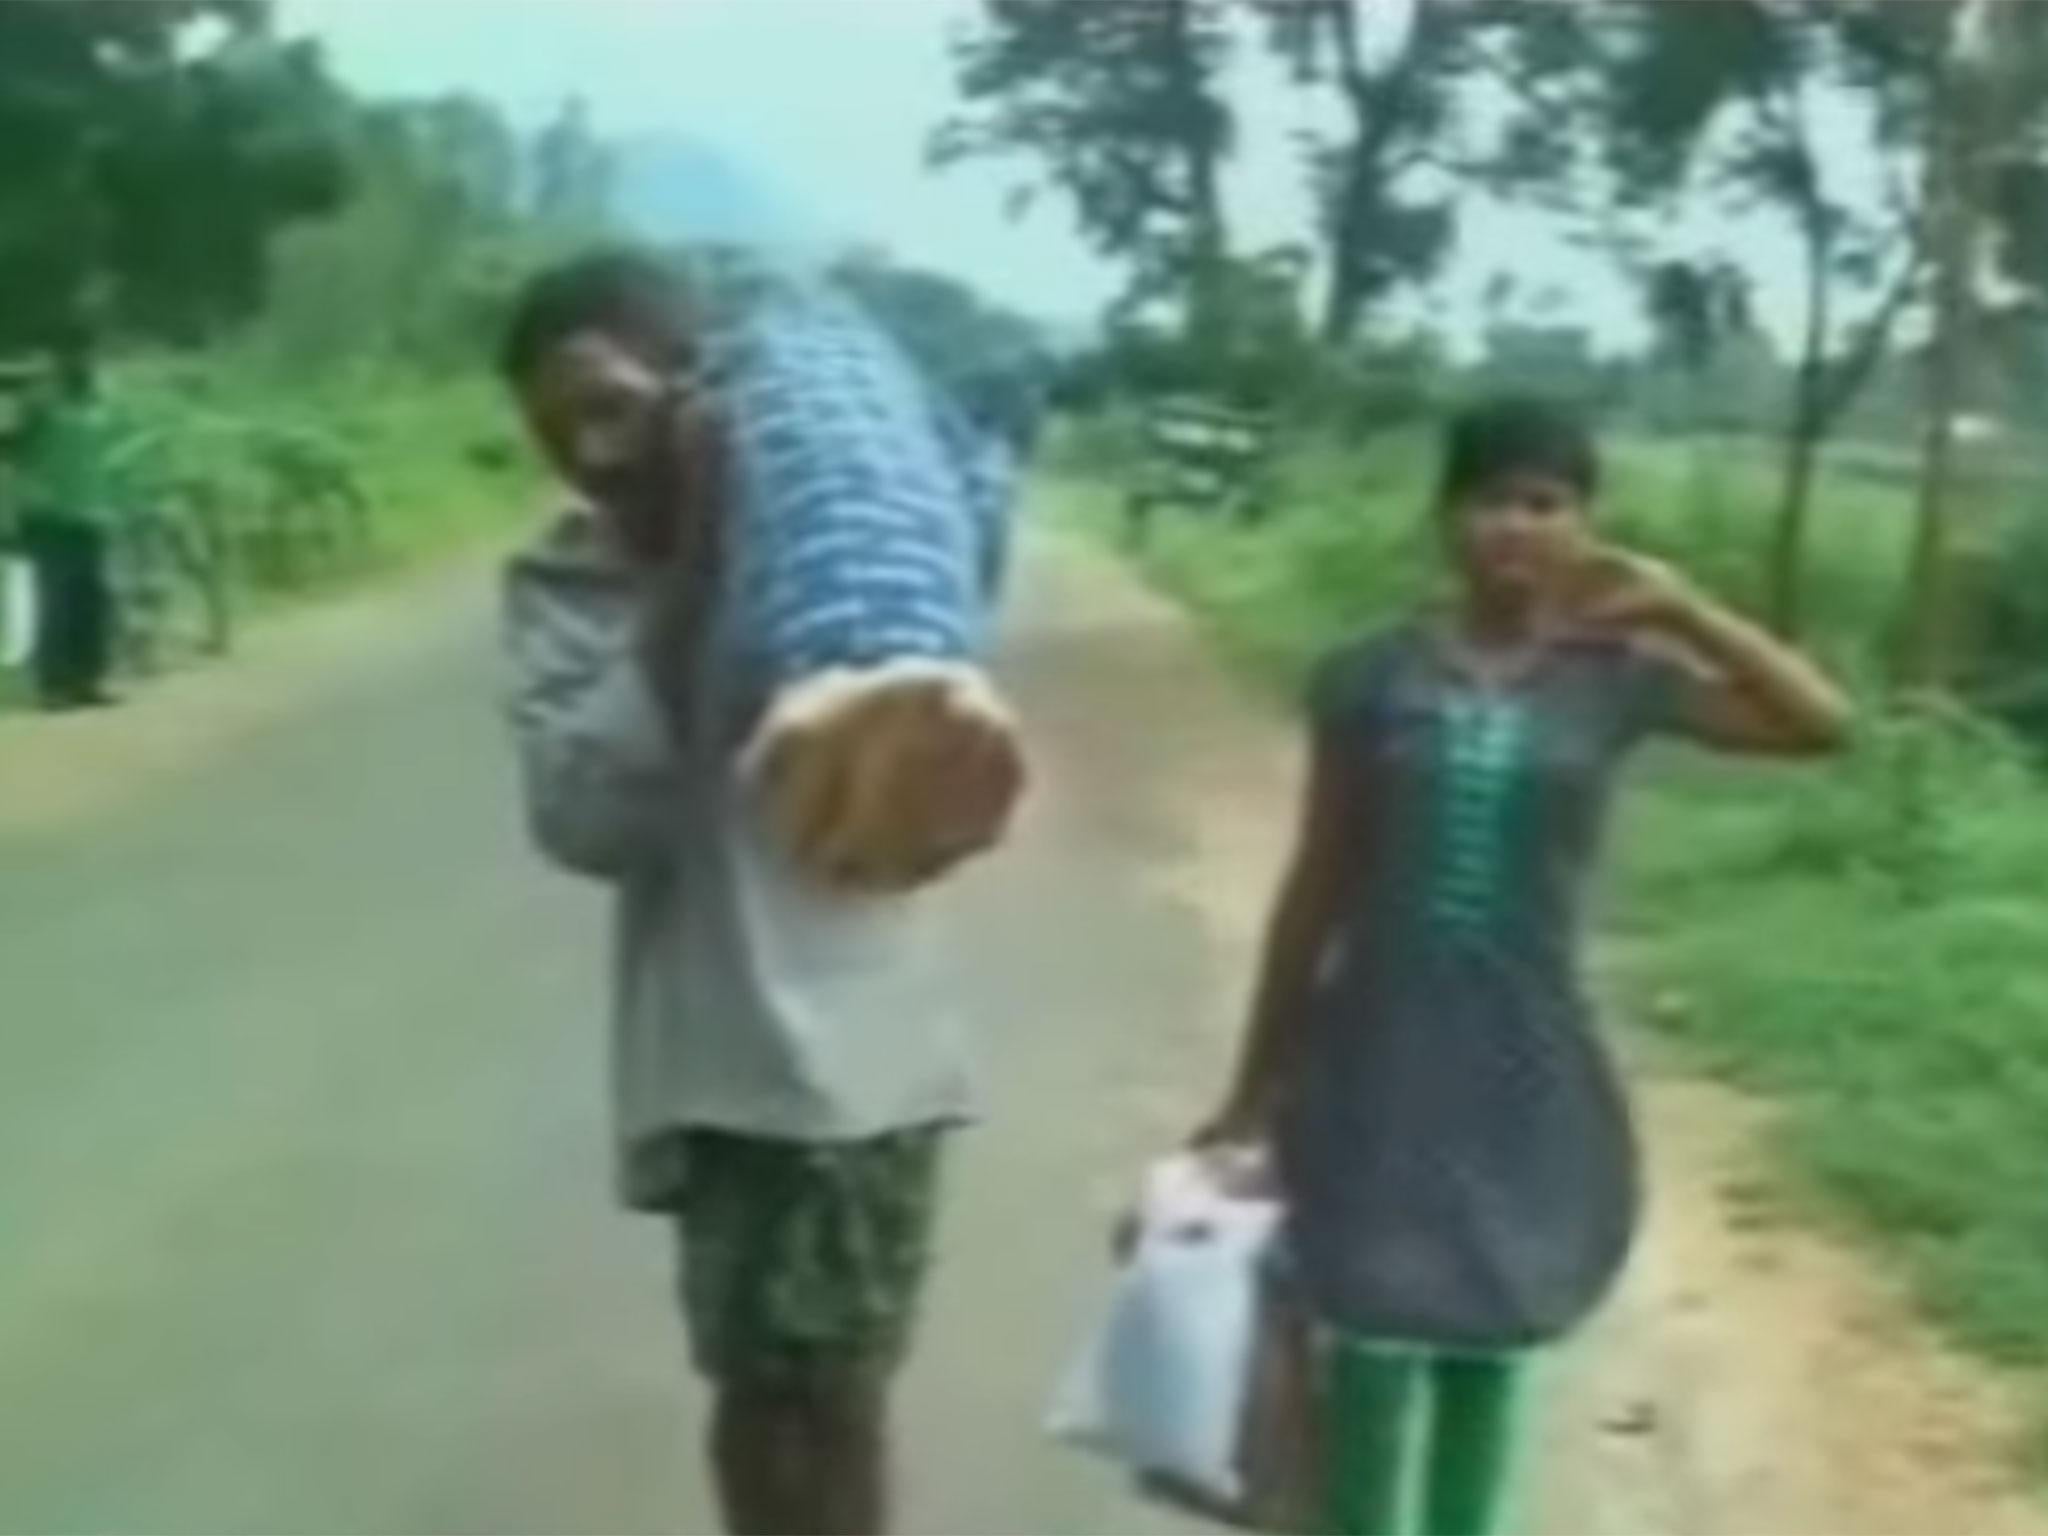 Pictures of Dana Majhi carrying his deceased wife shocked India